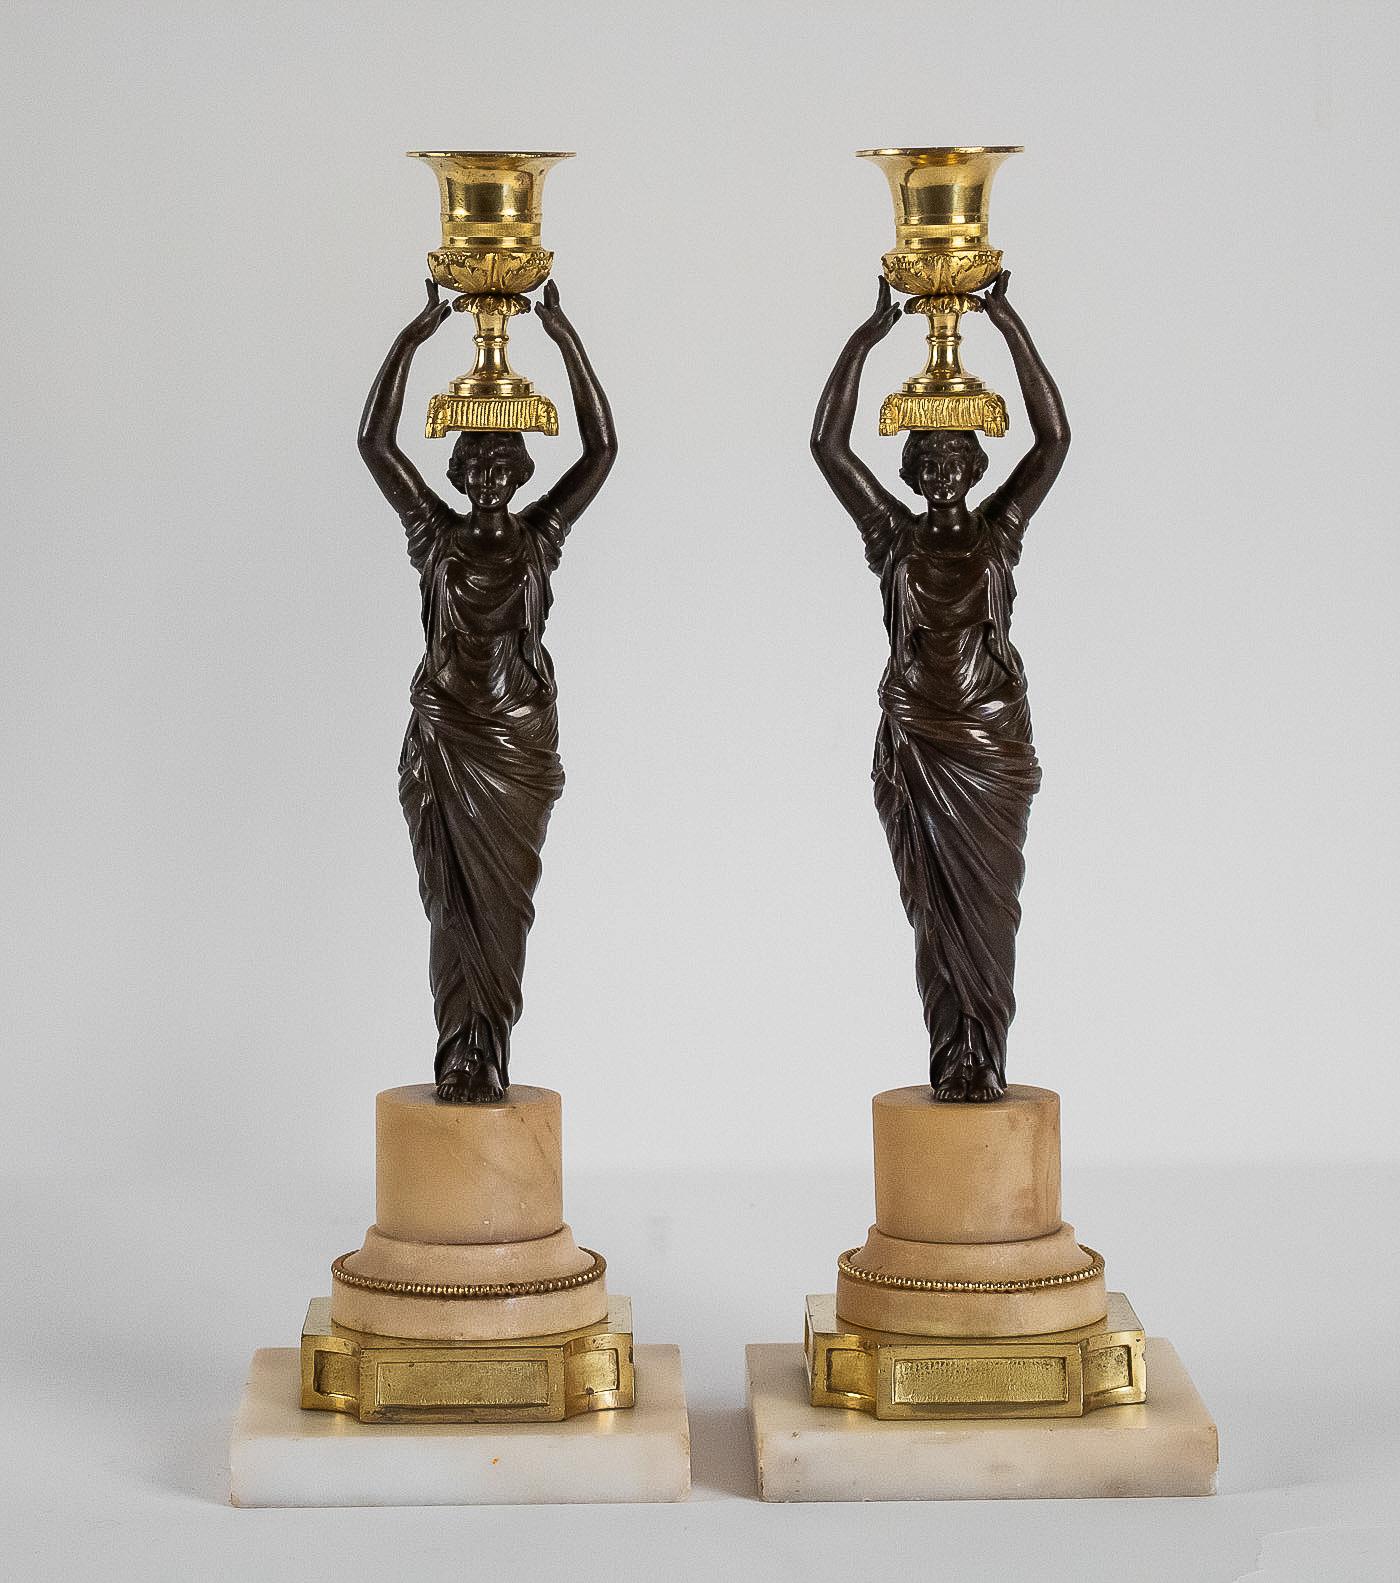 French Louis XVI period, pair of patinated and gilded candlesticks, circa 1780.

Unique pair of finely chiseled mercury-gilt and patinated bronze candlesticks depicting antique female maidens, resting on gilt bronze and, Sienna and Carrara marble